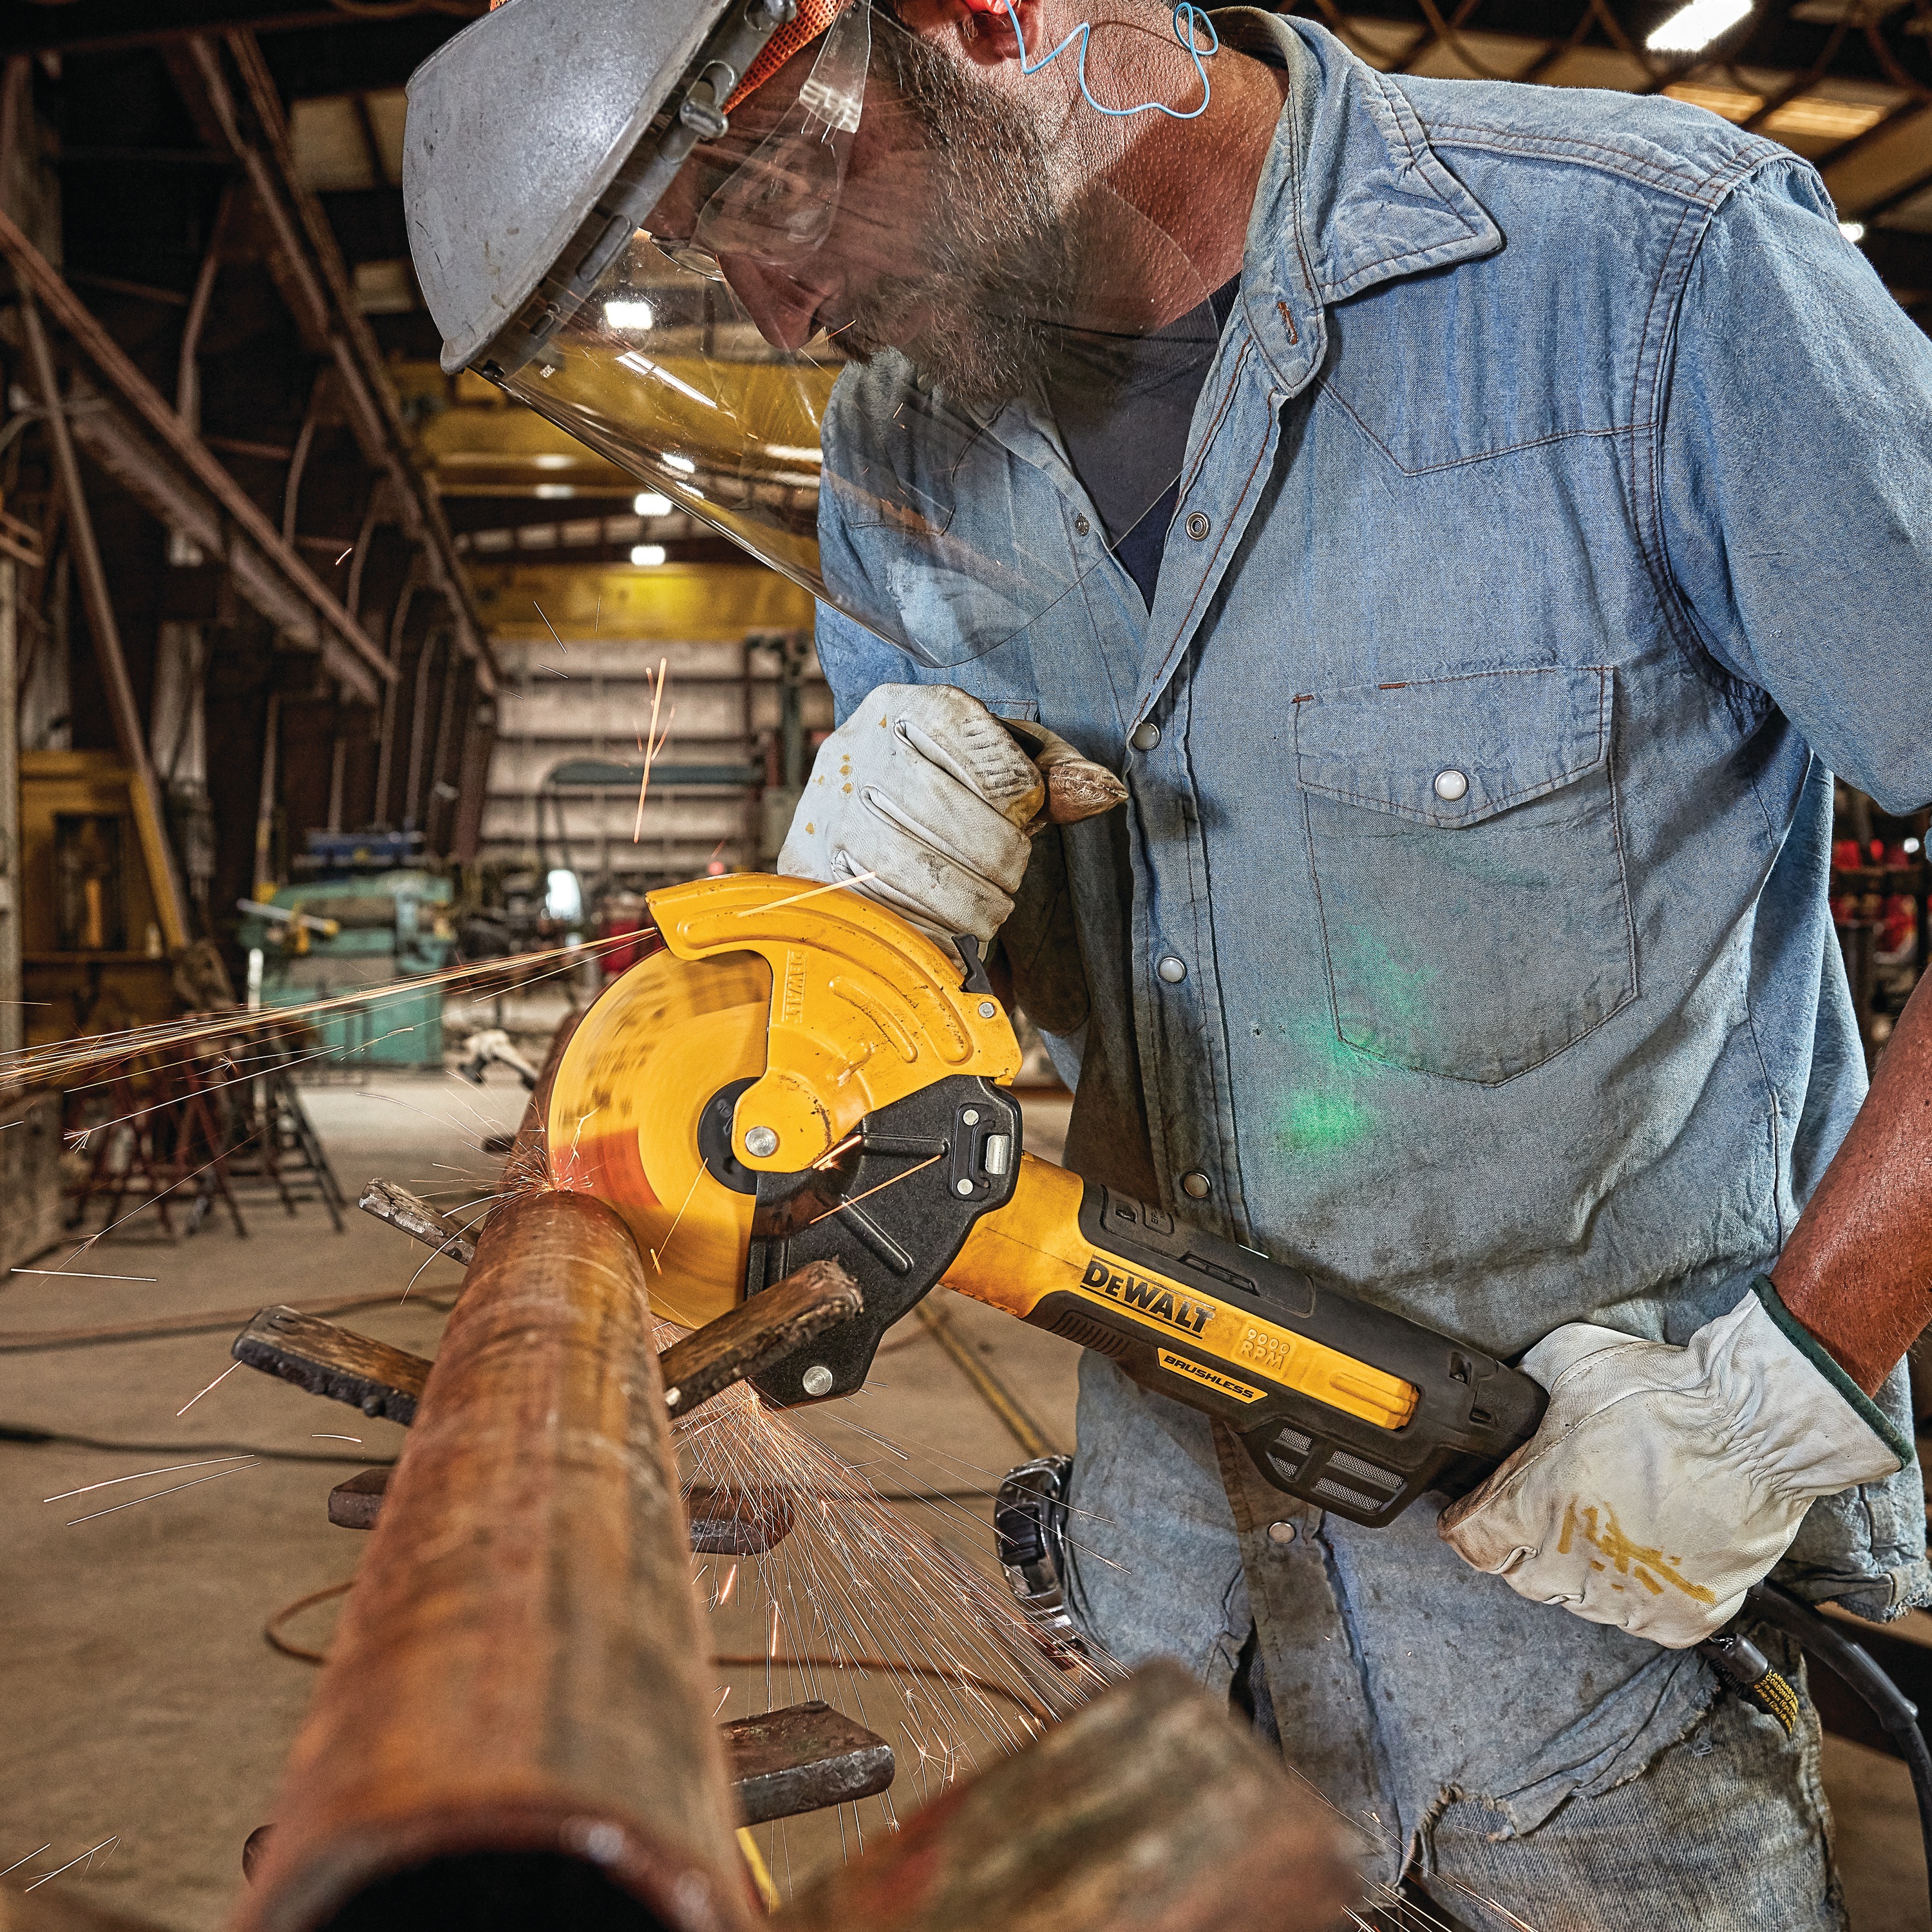 5 inch and 6 inch brushless small angle grinder with a rat tail, adjustable cut-off guard, kickback brake and nolock being used to grind on a metal pipe by a worker.